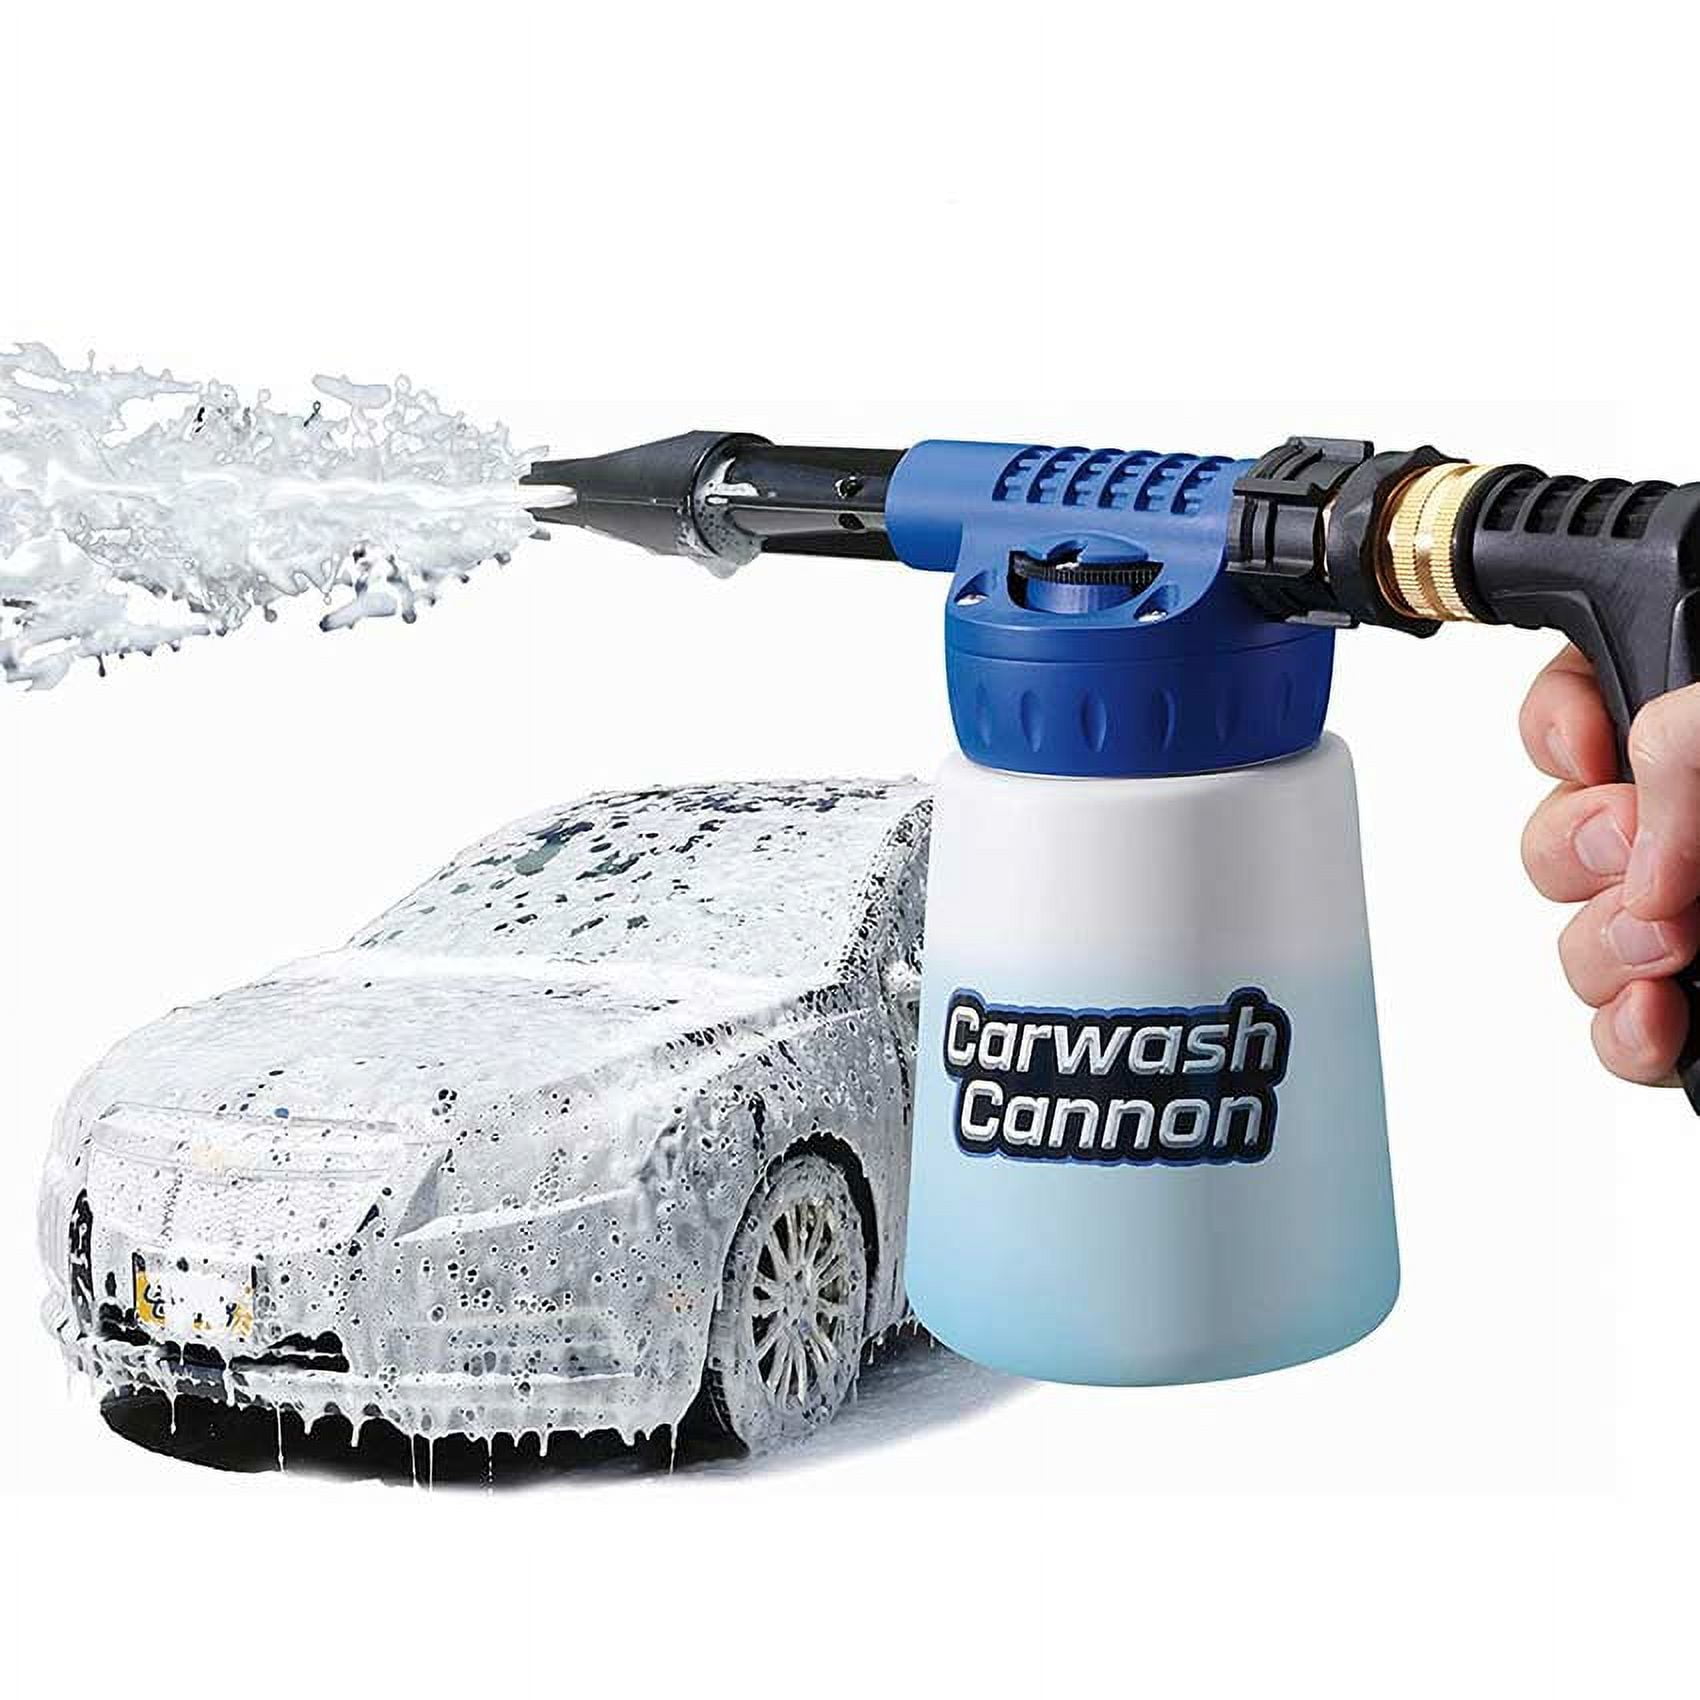 Carwash Cannon Soap Foam Blaster Nozzle Spray Gun, Just spray and rinse, No  More Scrubbing, Just spray and rinse, Car wash system features